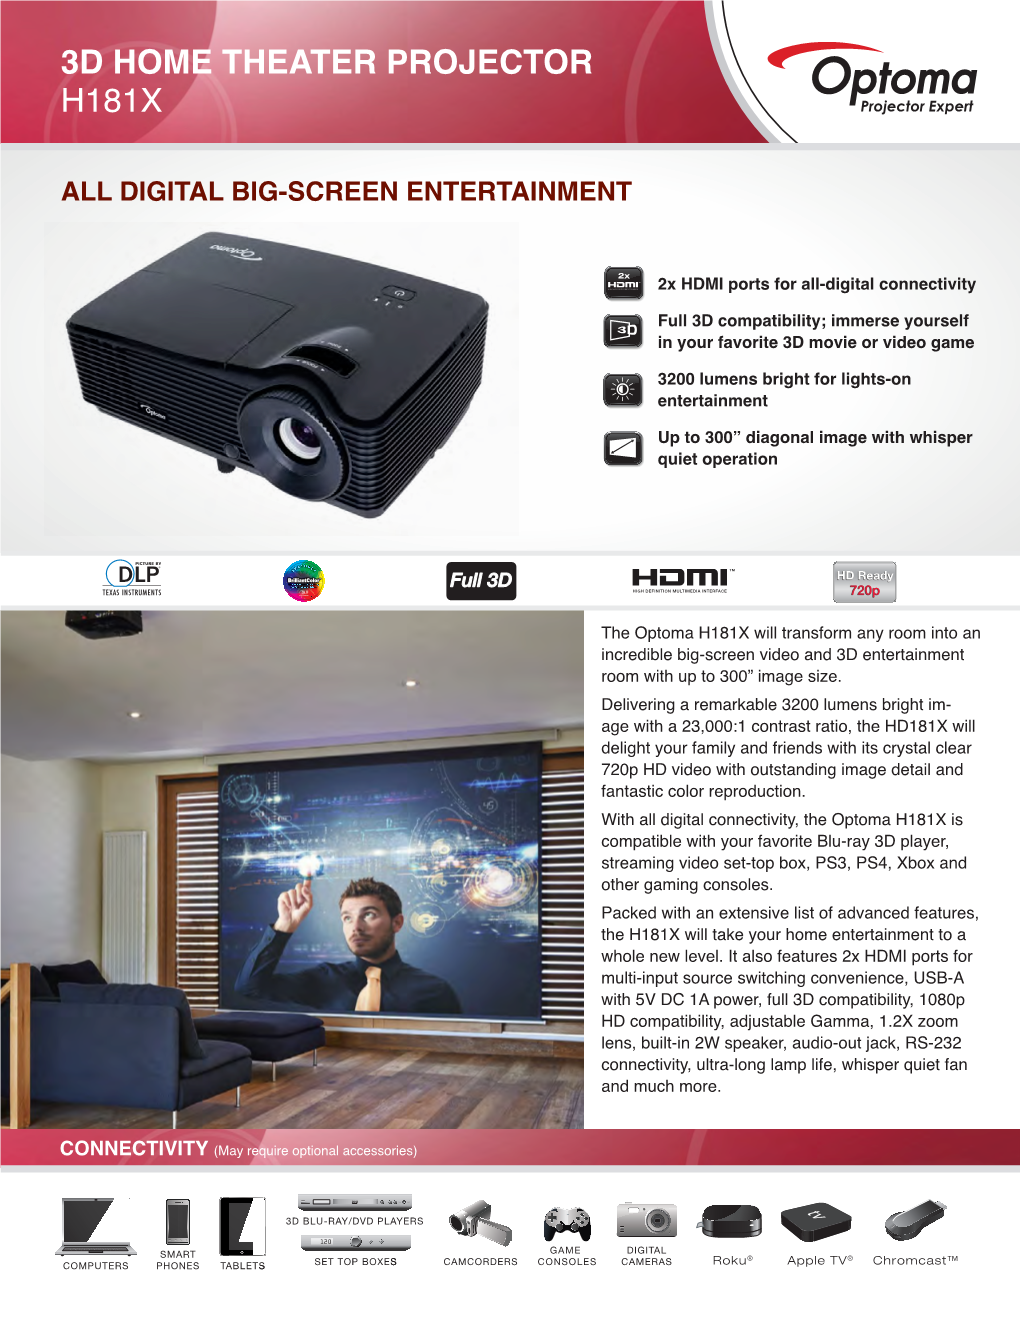 3D Home Theater Projector H181x